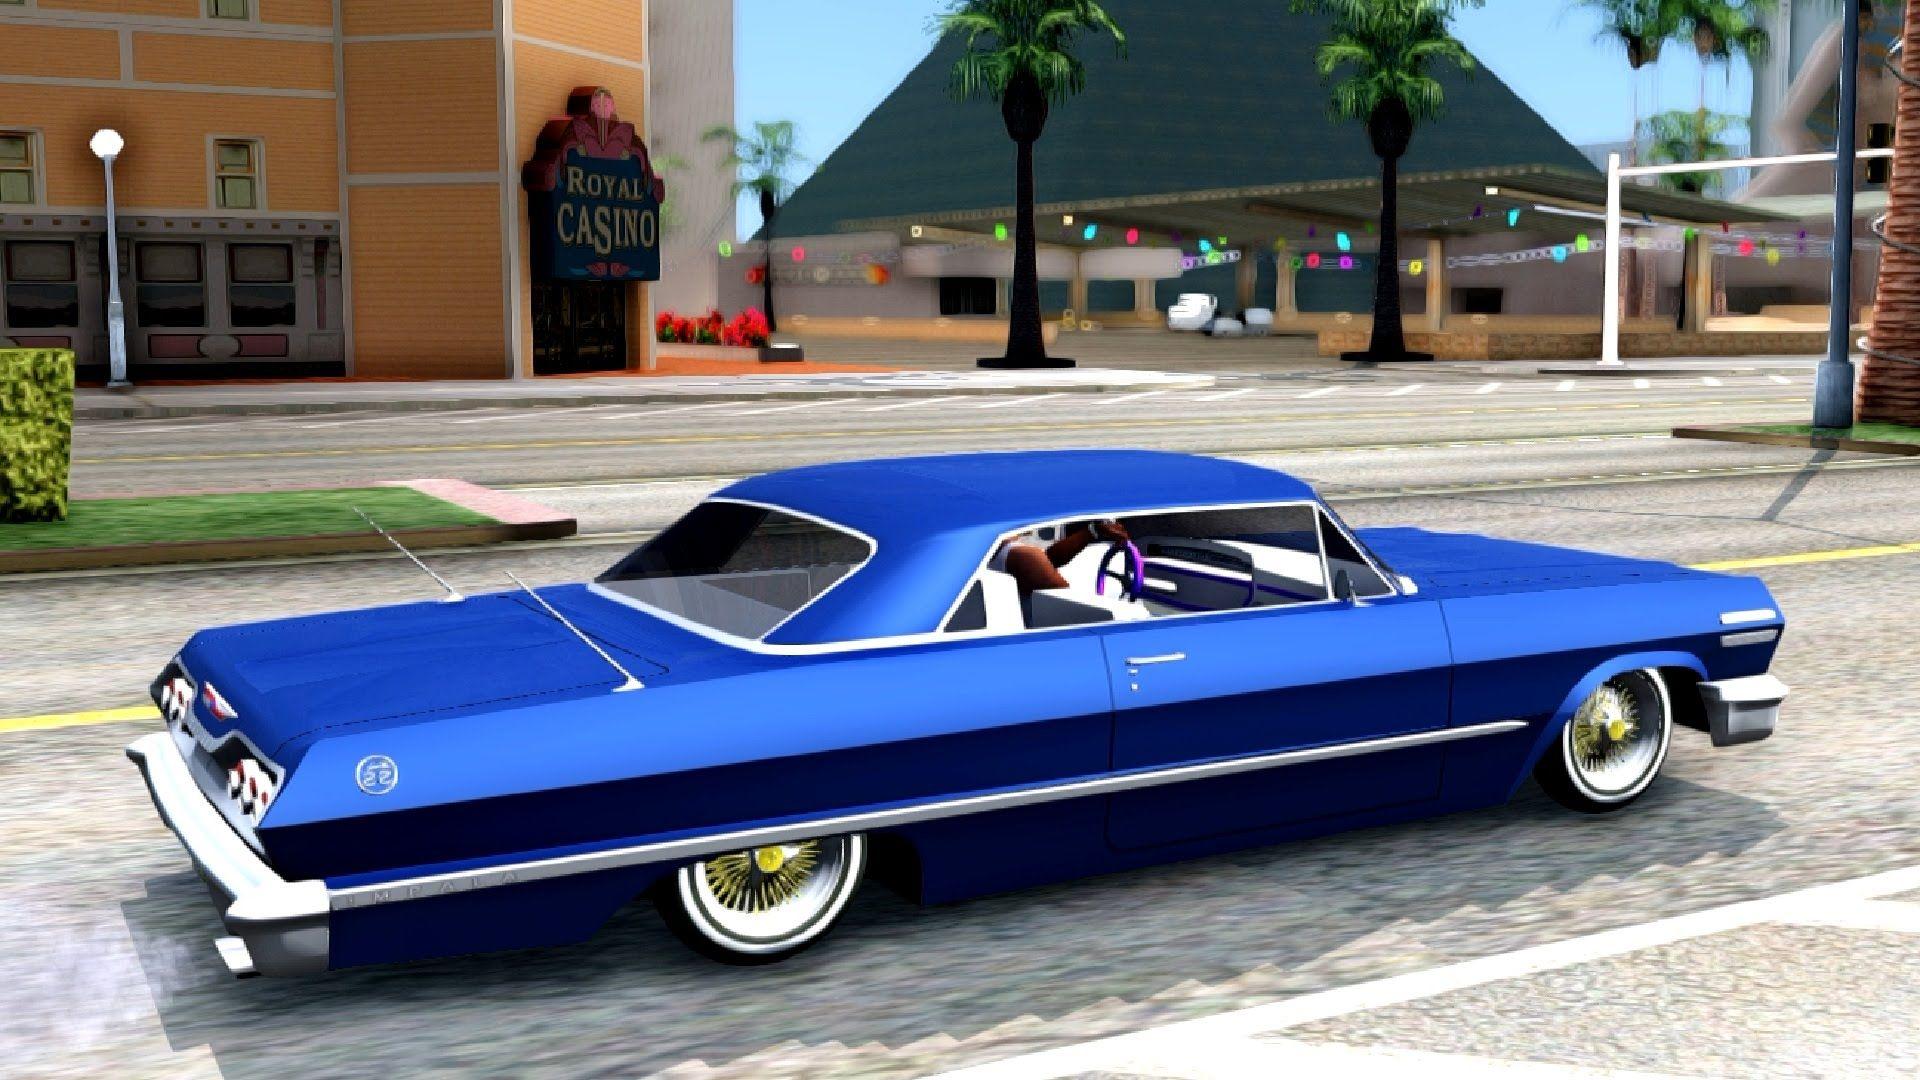 Chevy Impala Lowrider Wallpaper. Car Wallpaper With Chevy Impala